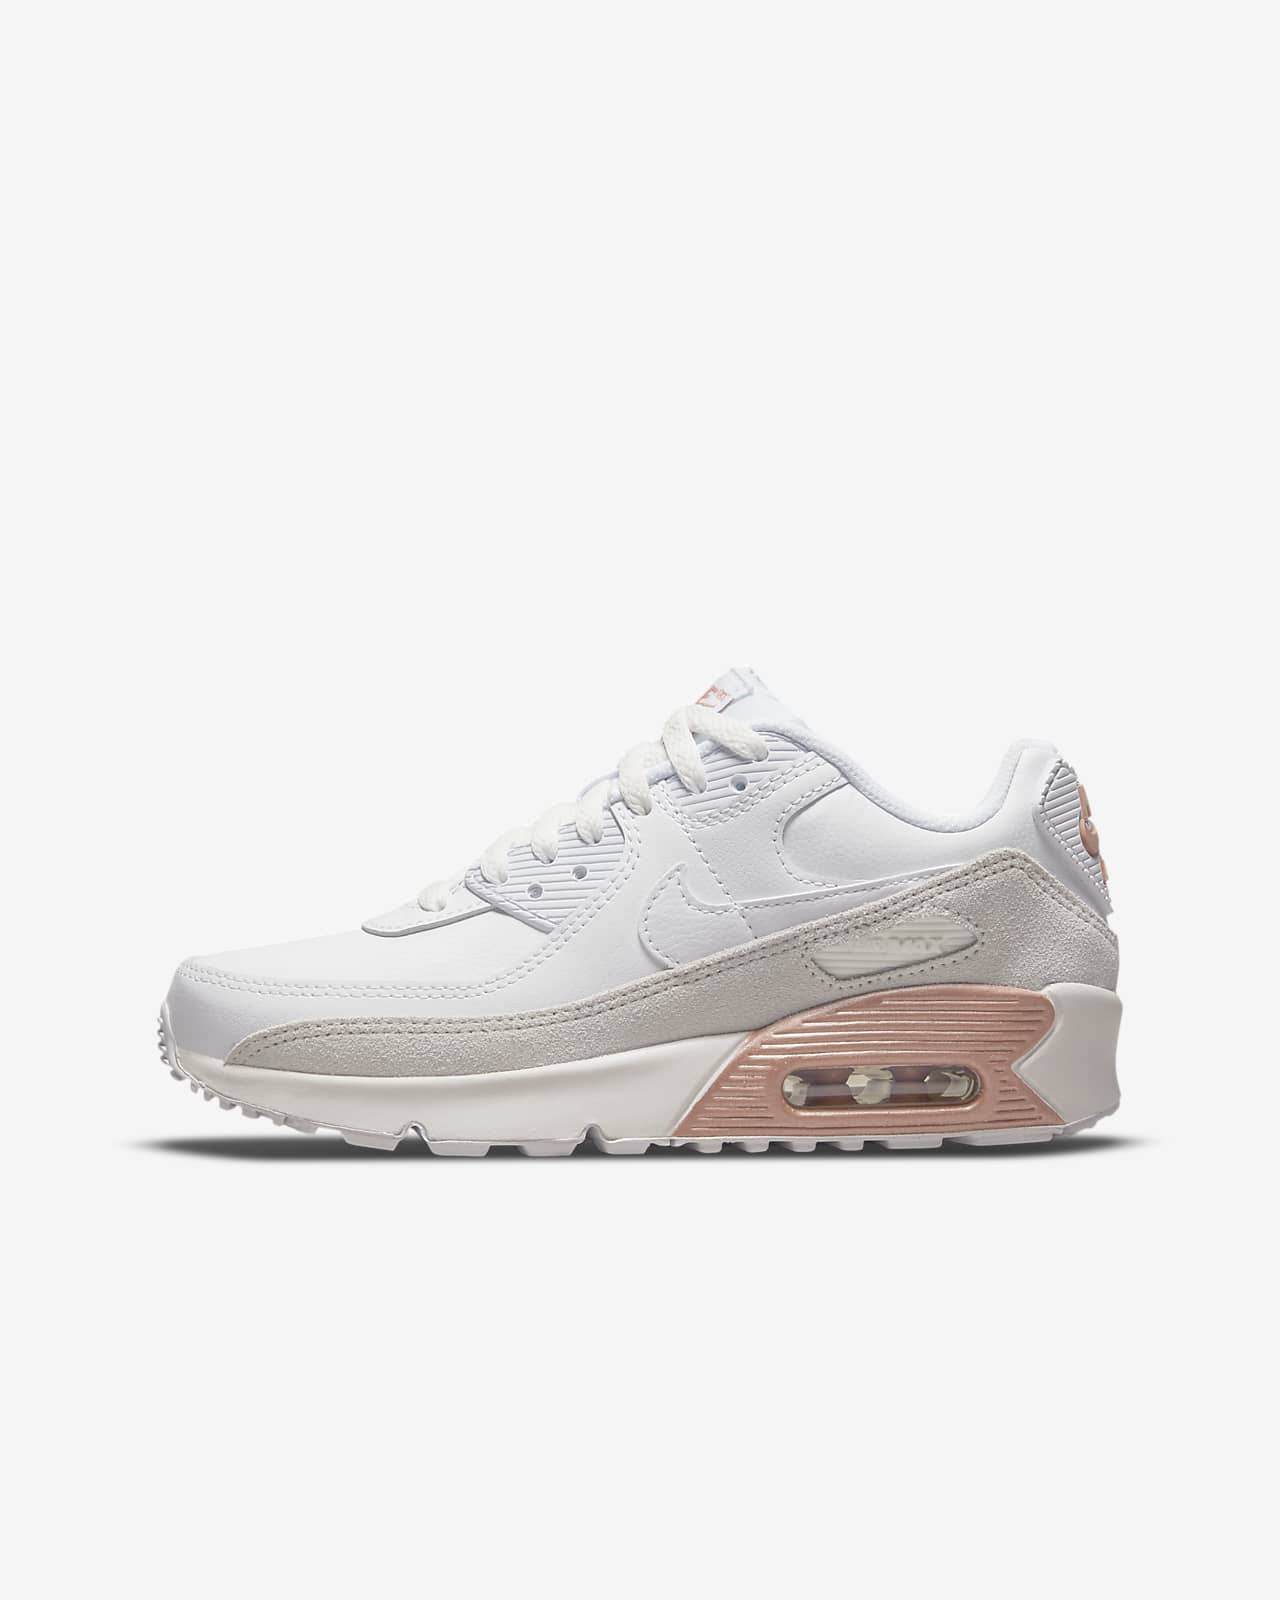 nike air max 90 for girls